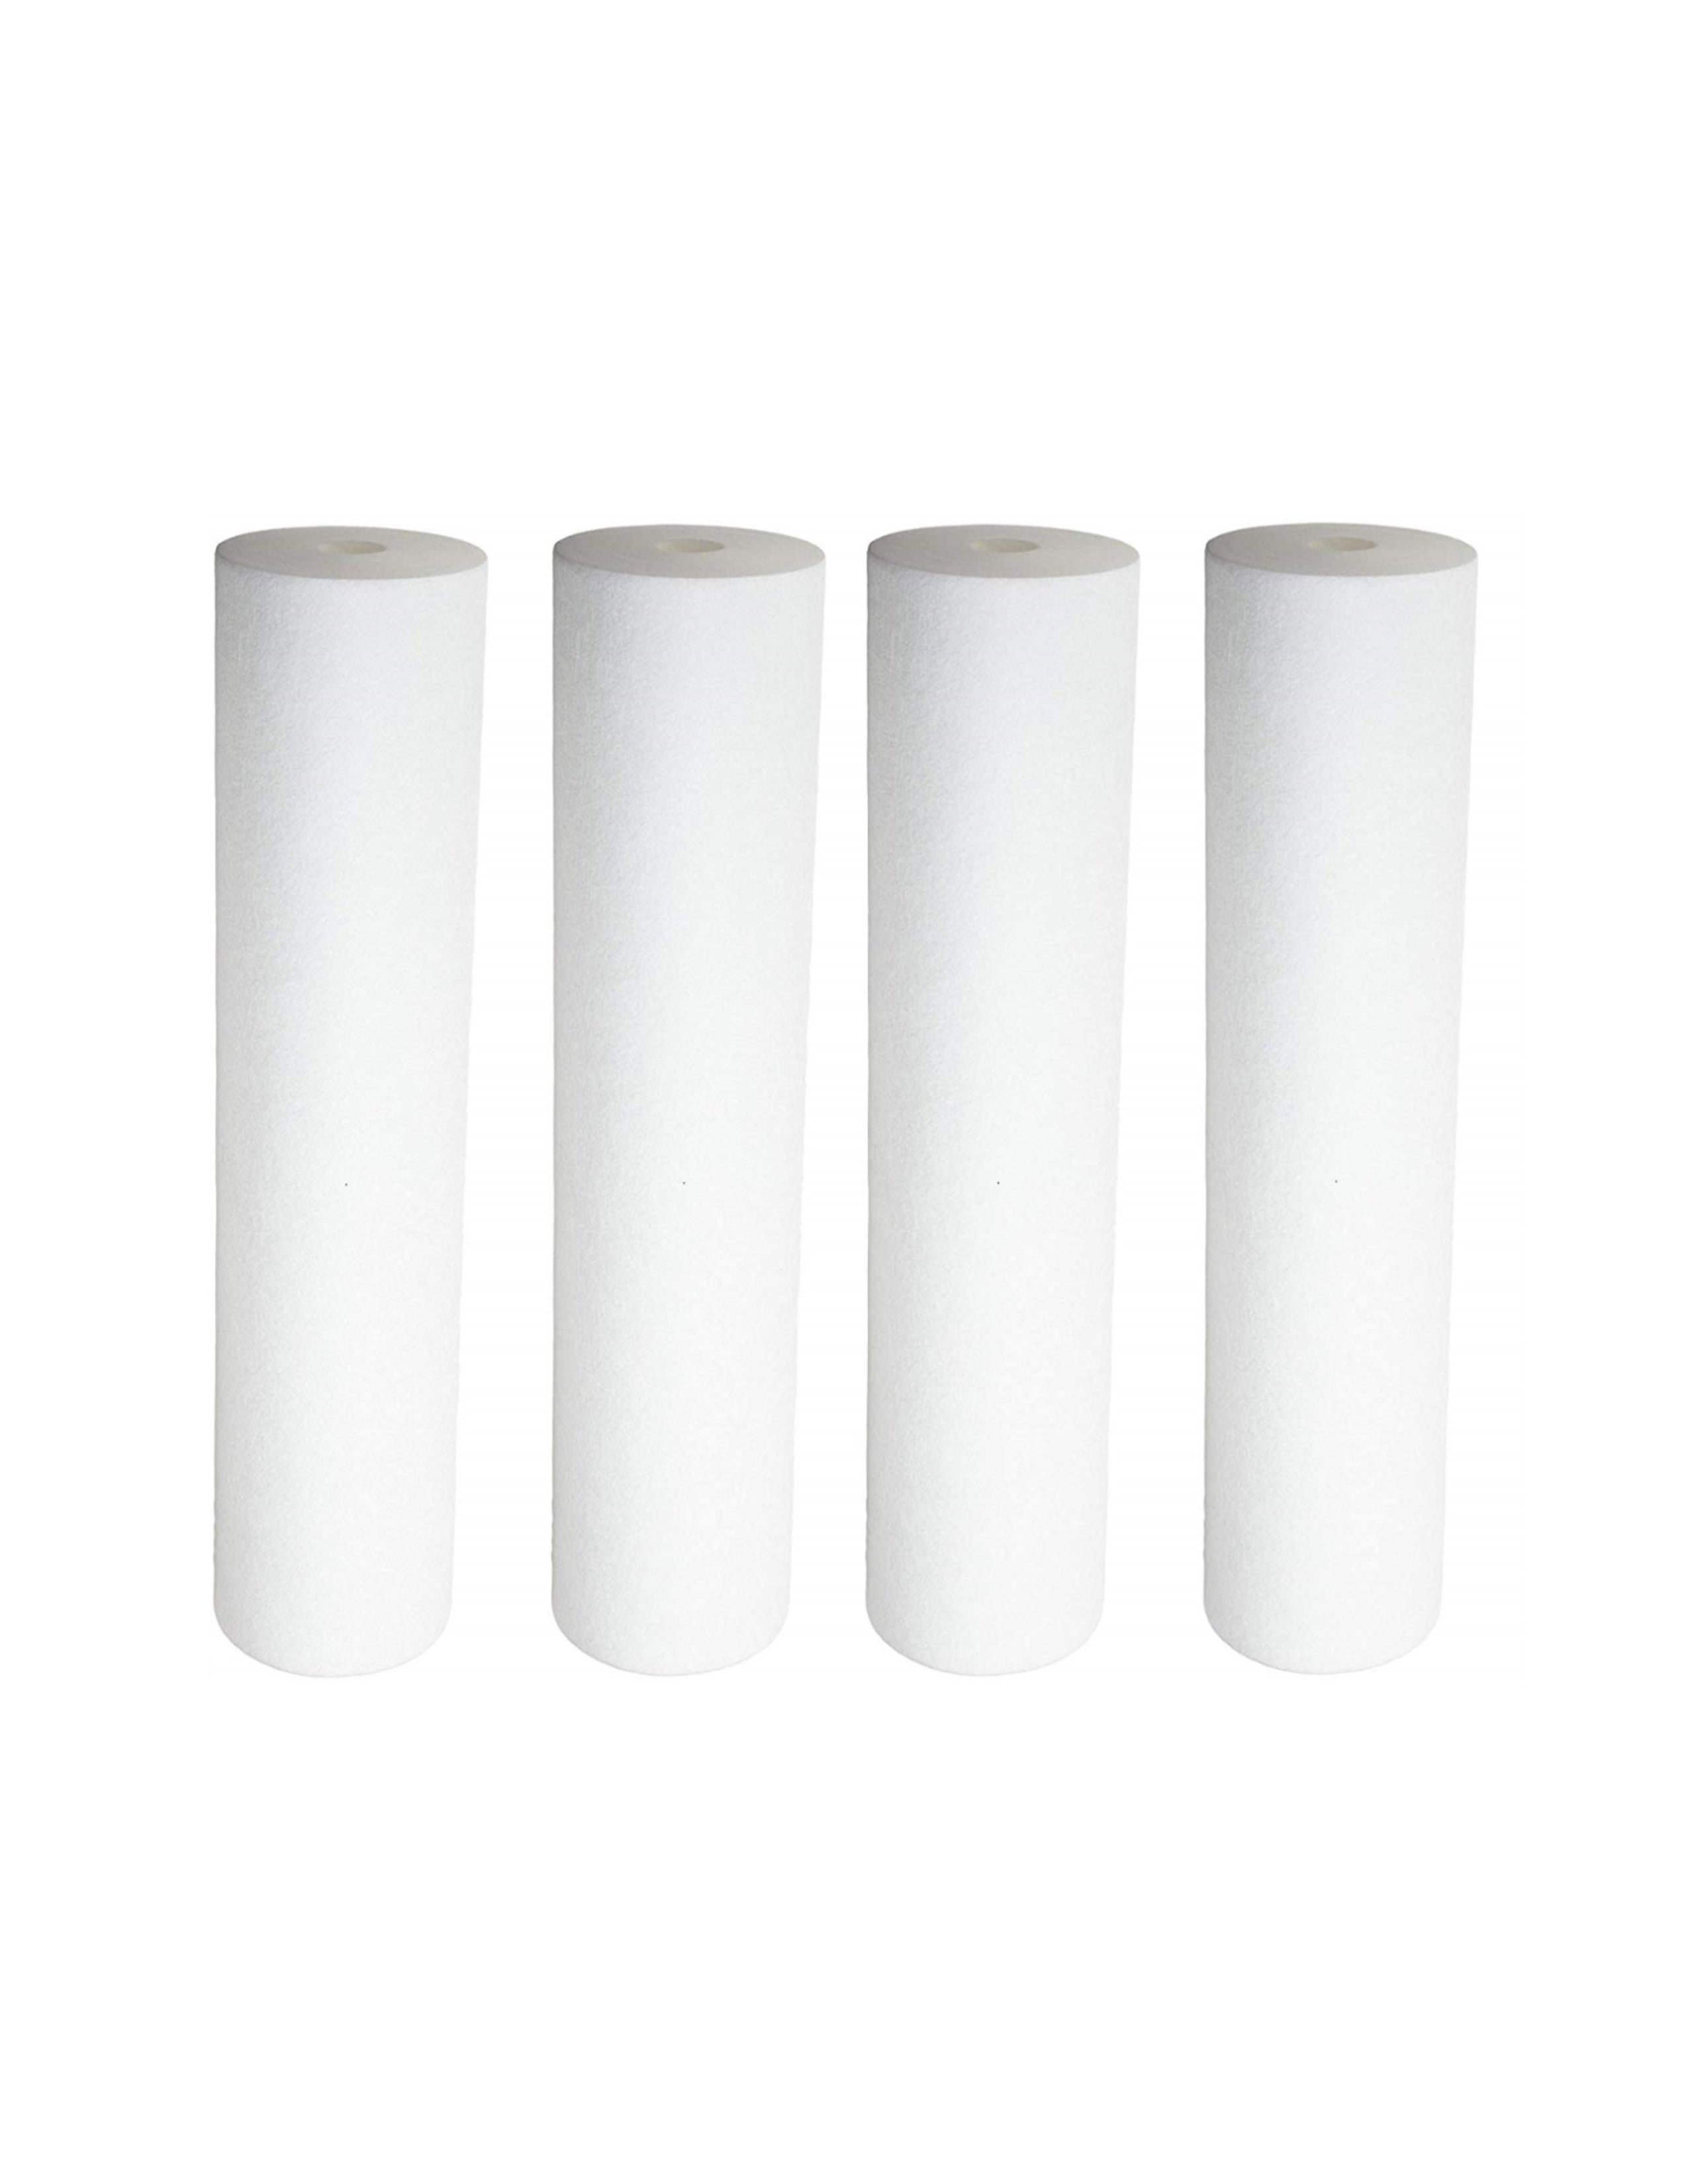 Fits Pentek PS1-10C 1 Micron 10 x 2.5 Comparable Sediment Water Filter 25 Pack 